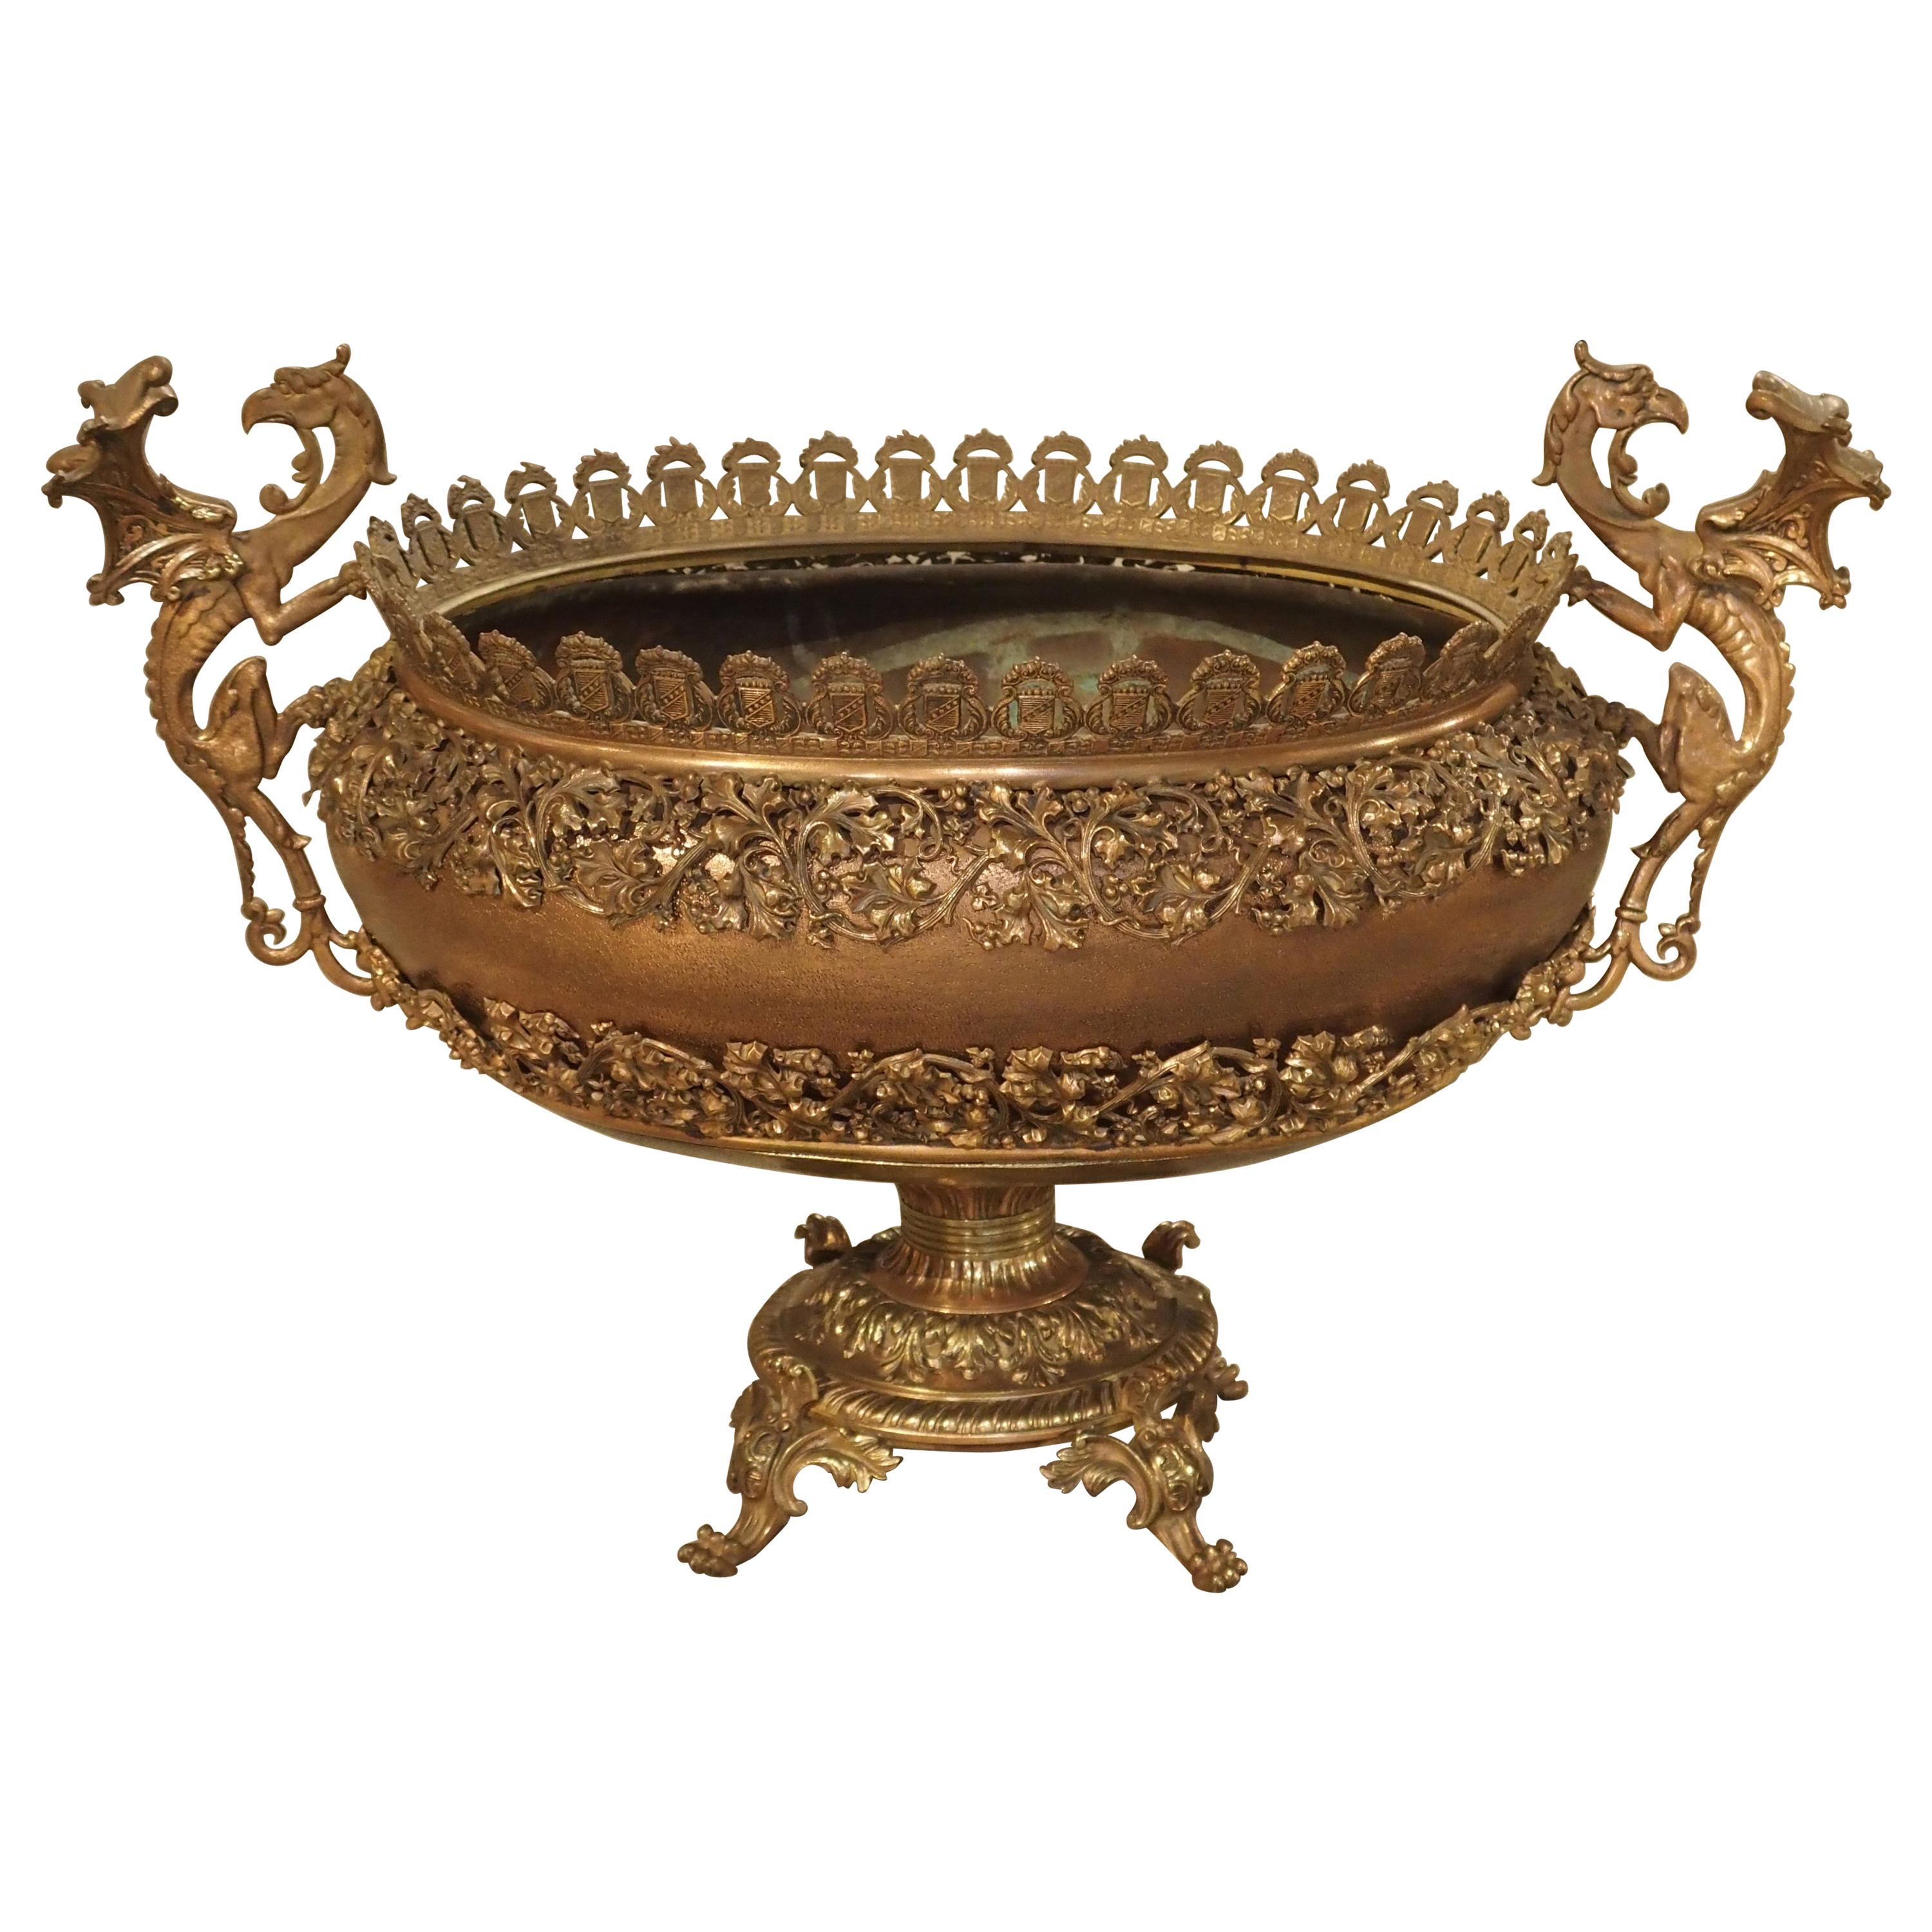 Antique Copper, Bronze, and Mixed Metal Planter from France, Early 1900s